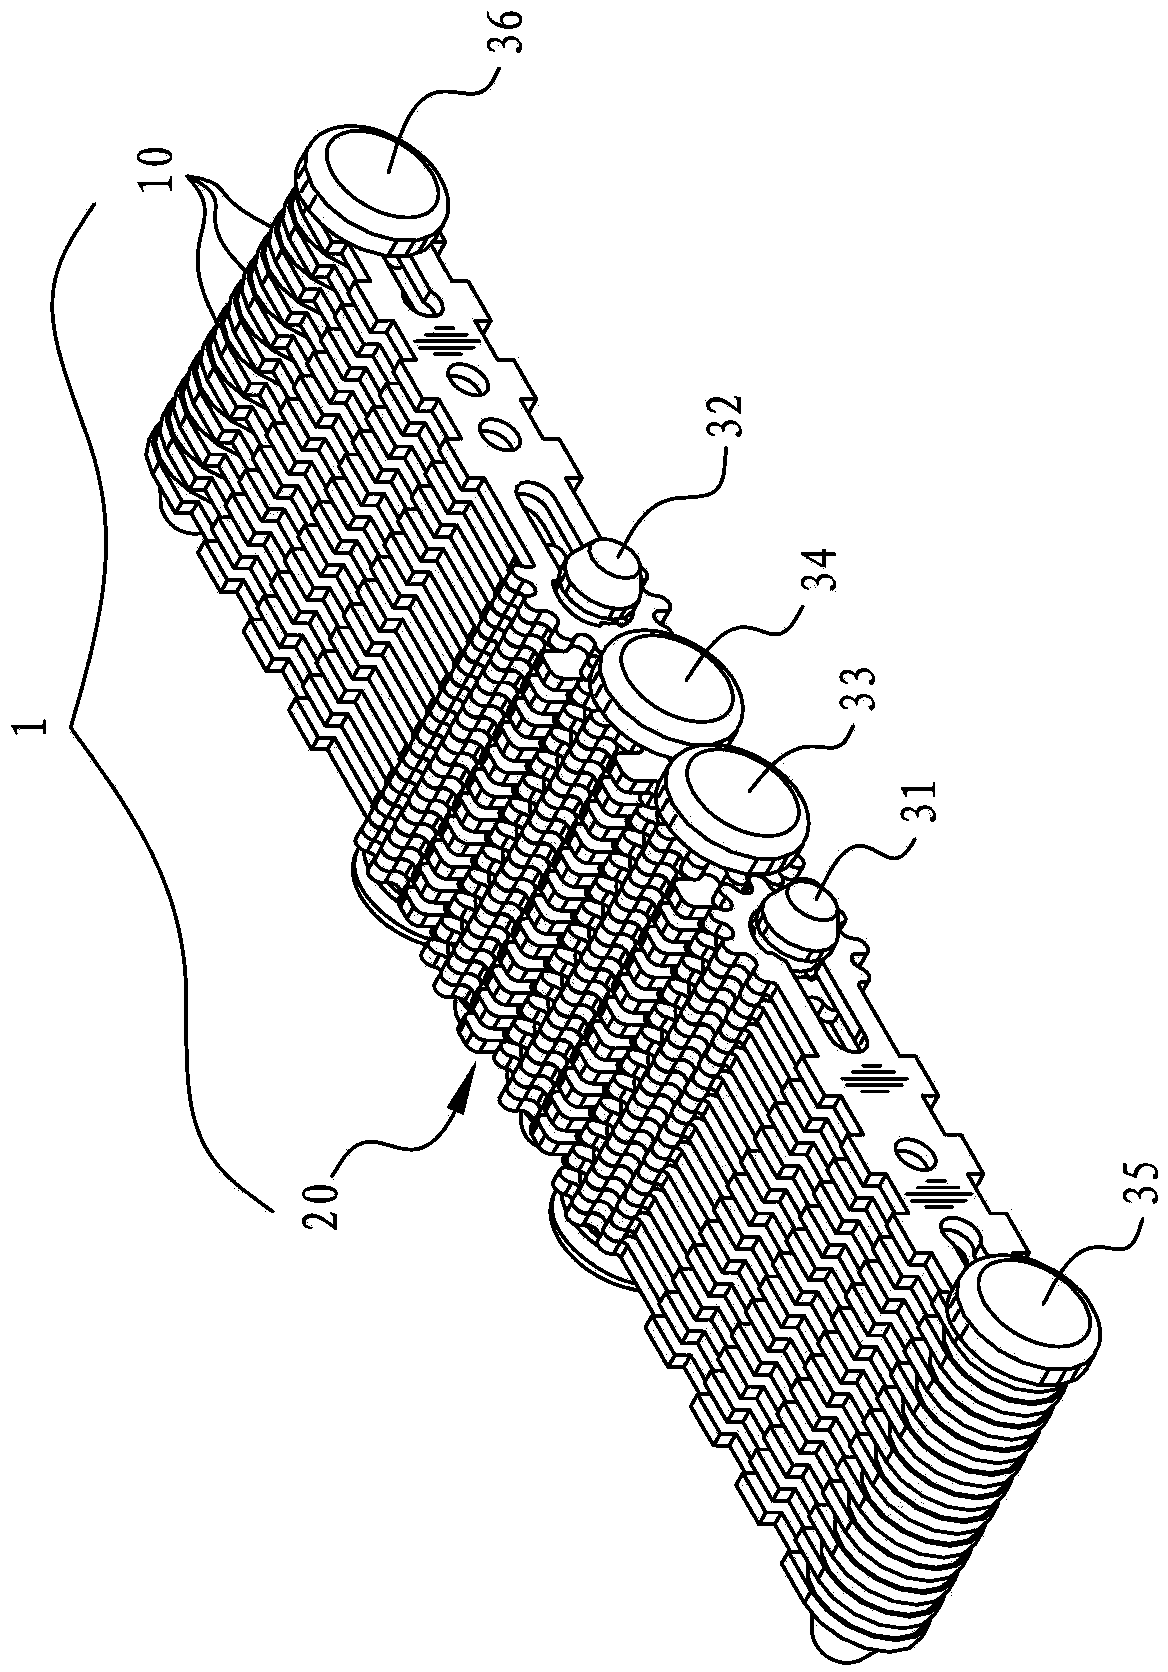 Synchronous unfolding and folding apparatus